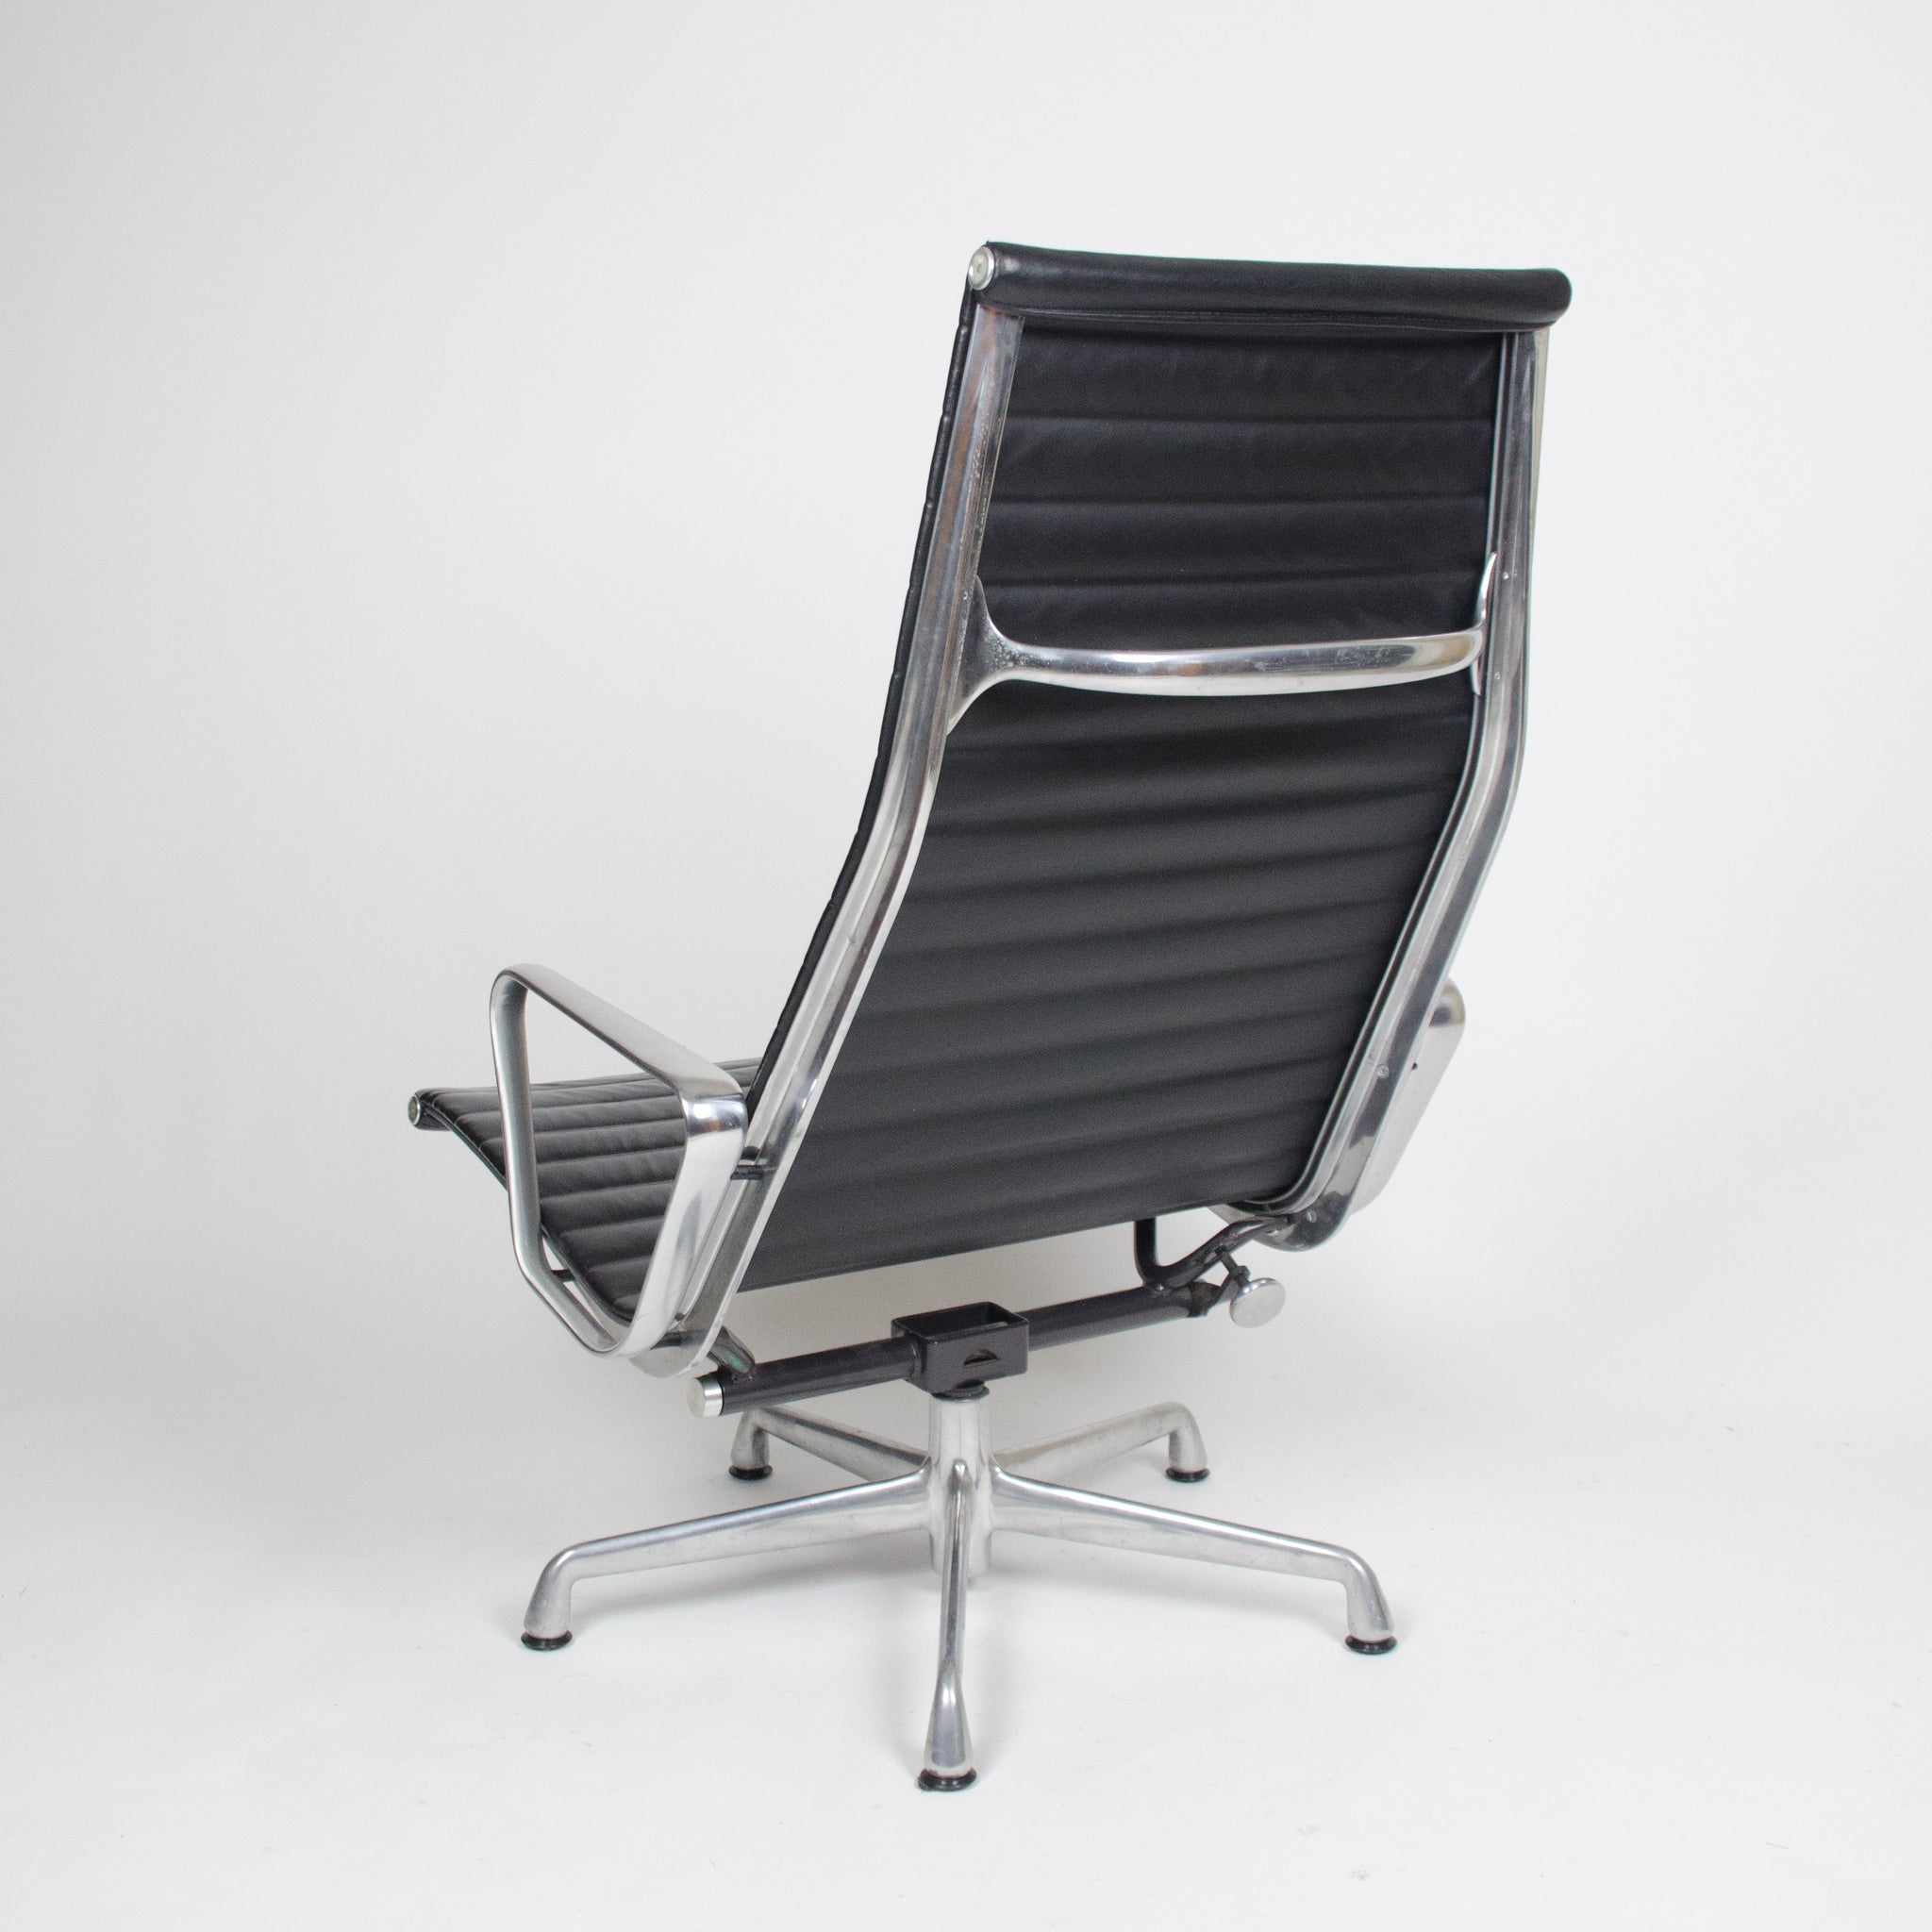 SOLD Eames Herman Miller High Back Aluminum Group Lounge Chair Black Leather